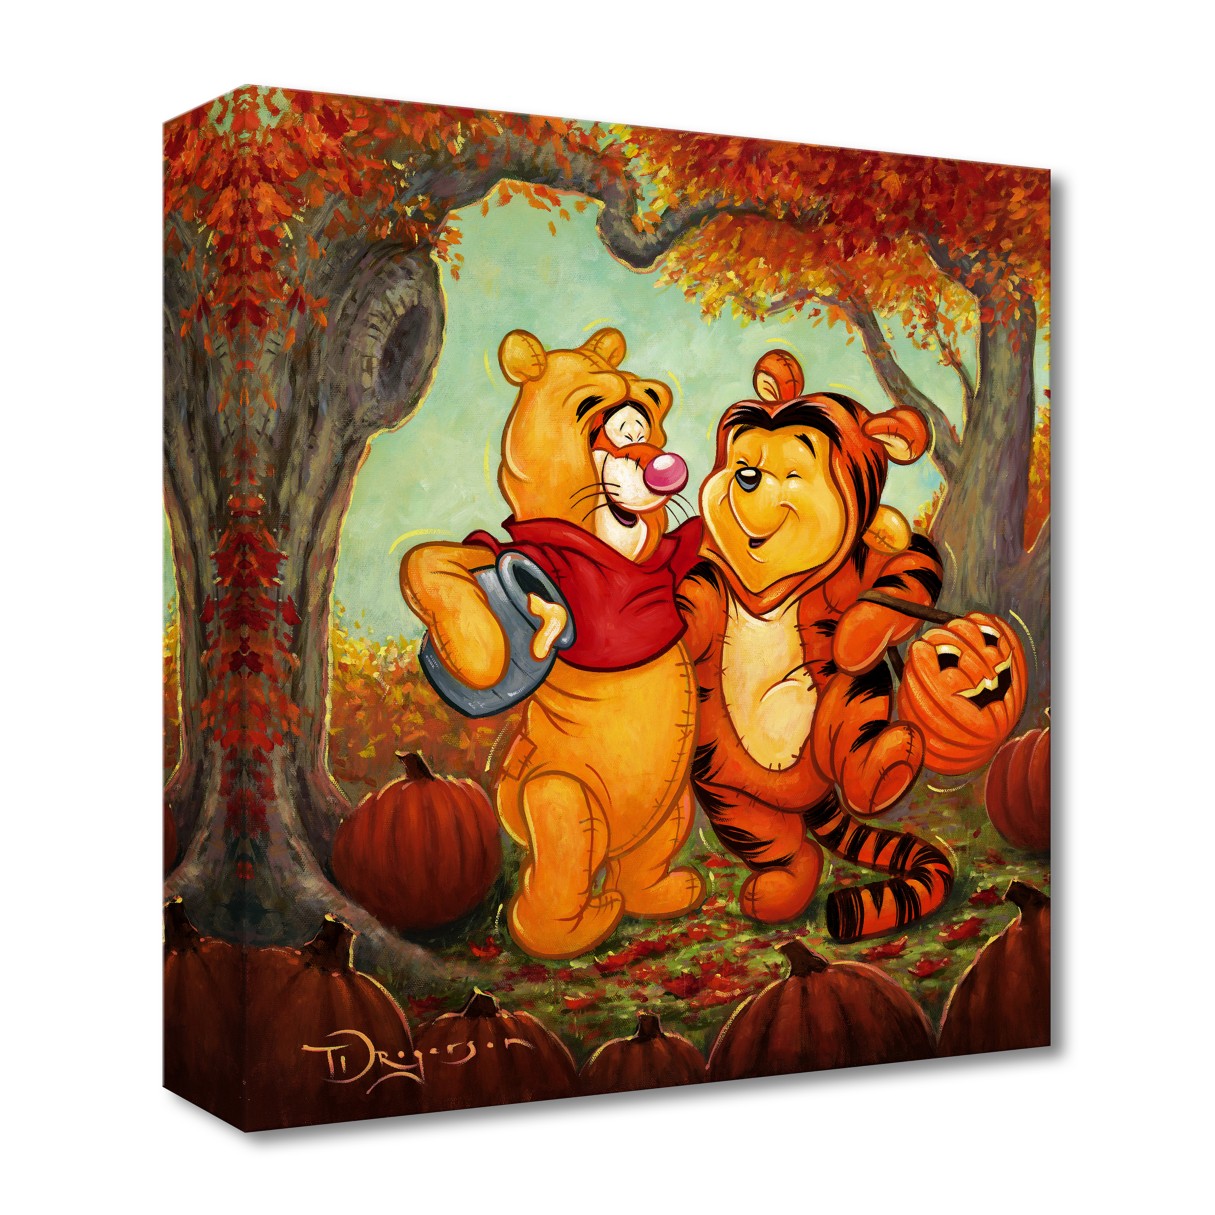 Winnie the Pooh and Tigger ''Friendship Masquerade'' Art by Tim Rogerson – Limited Edition